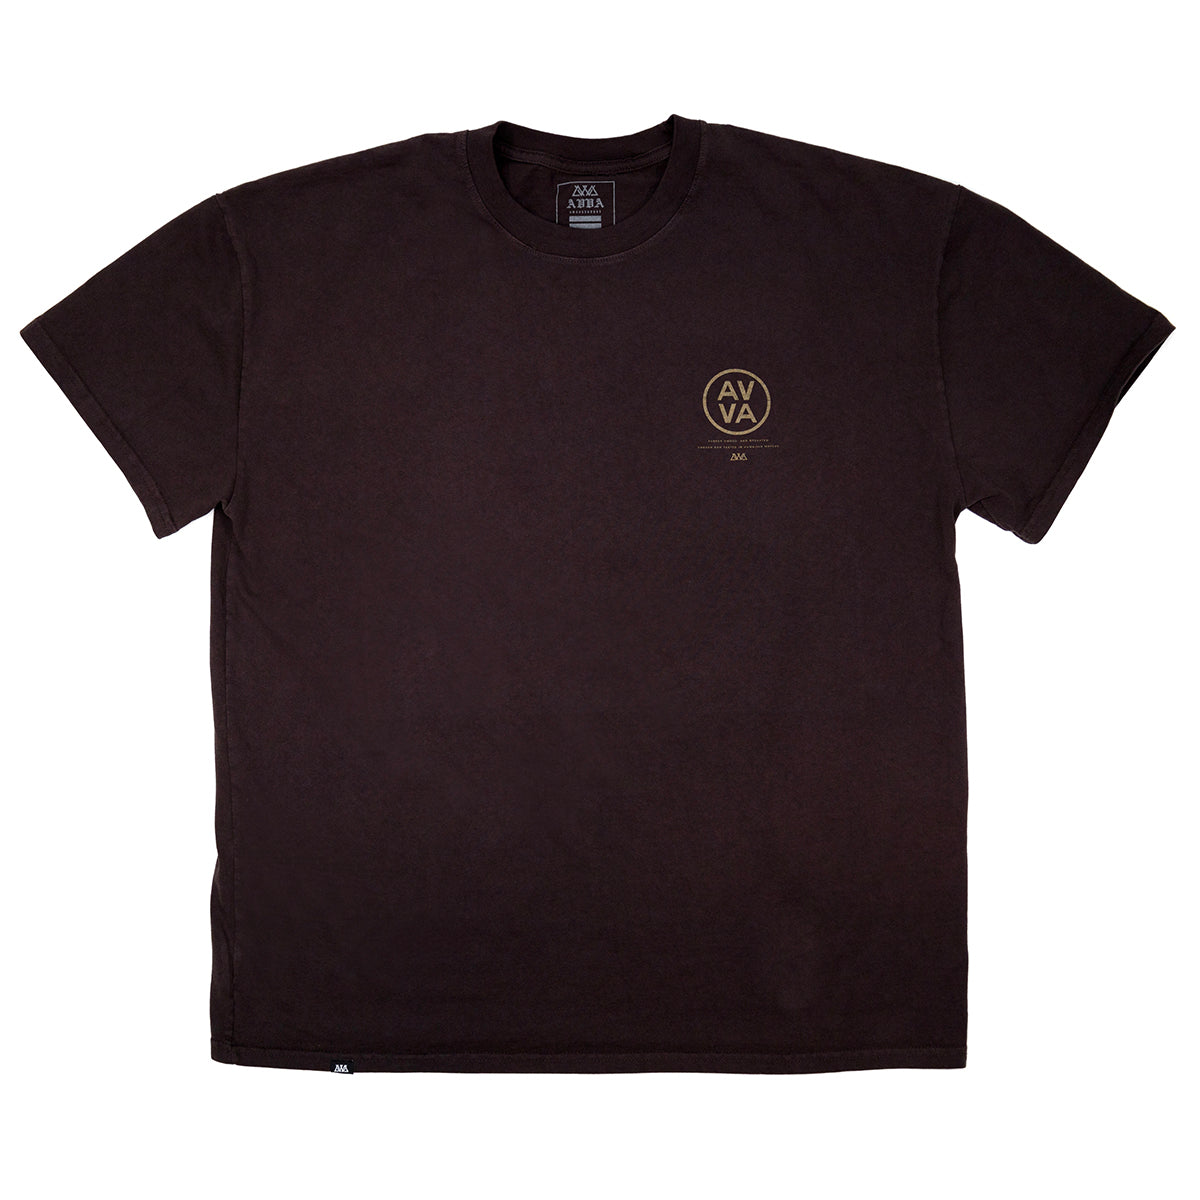 FRONT VIEW OF BROWN HEAVYWEIGHT CREED TEE.